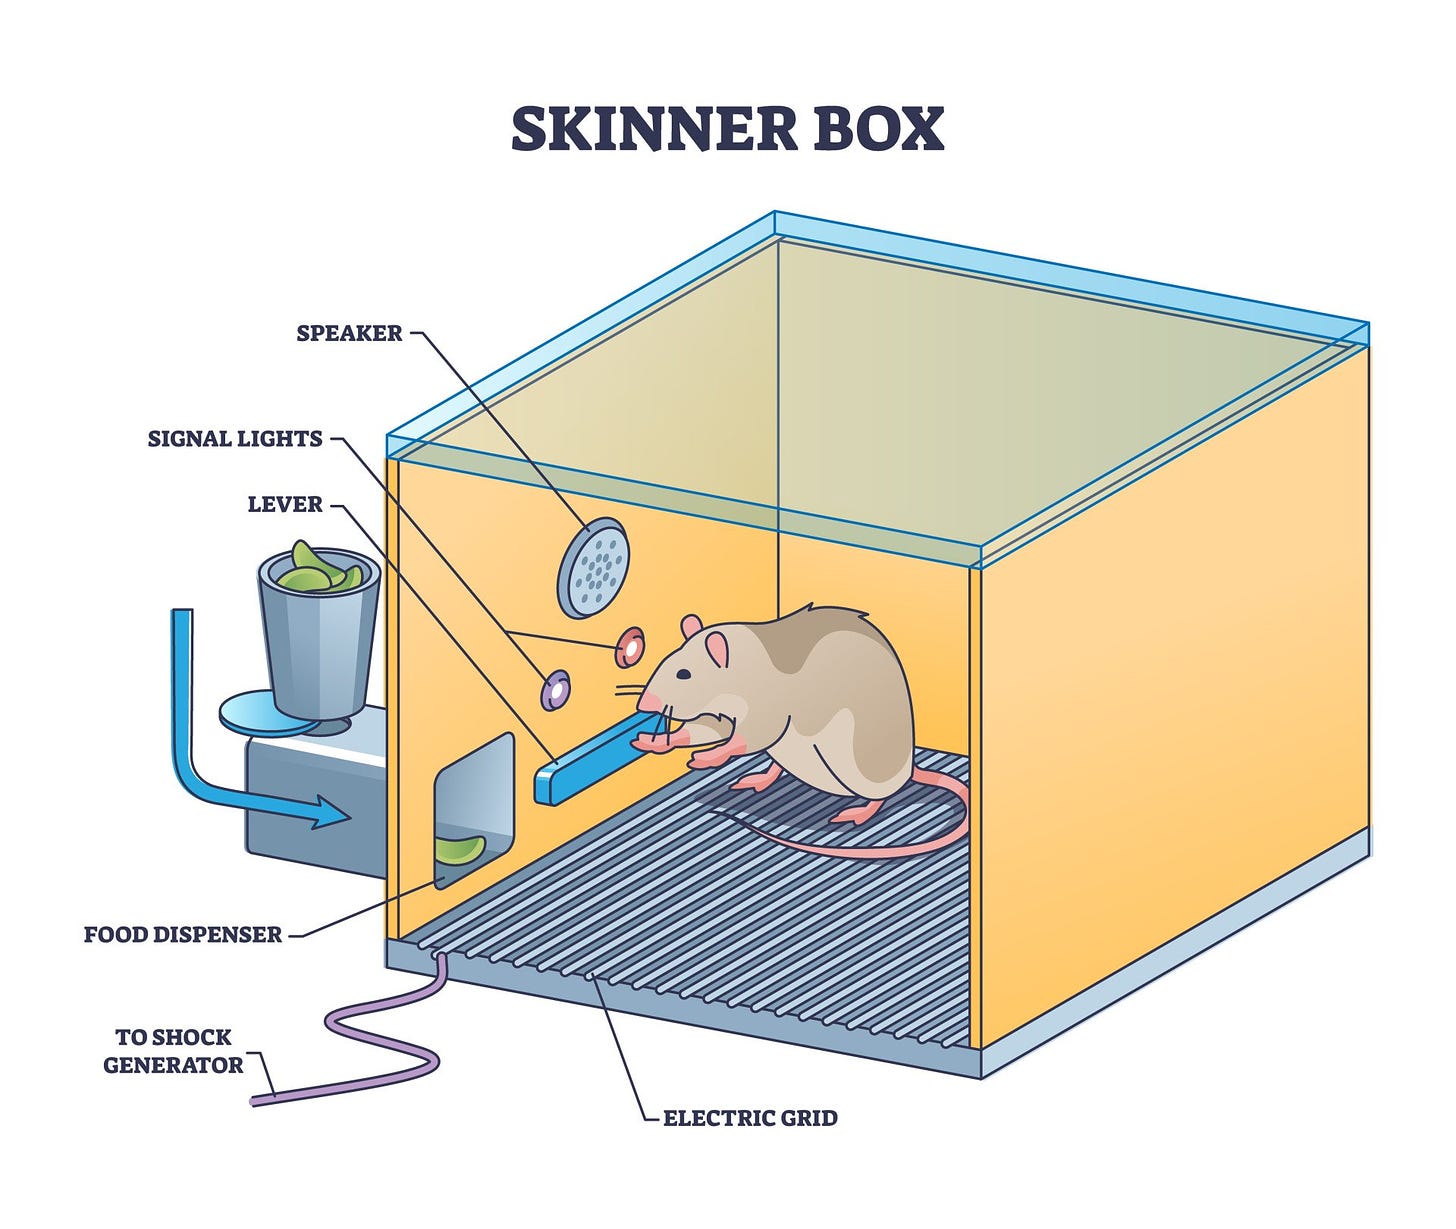 Skinner Box: What Is an Operant Conditioning Chamber?